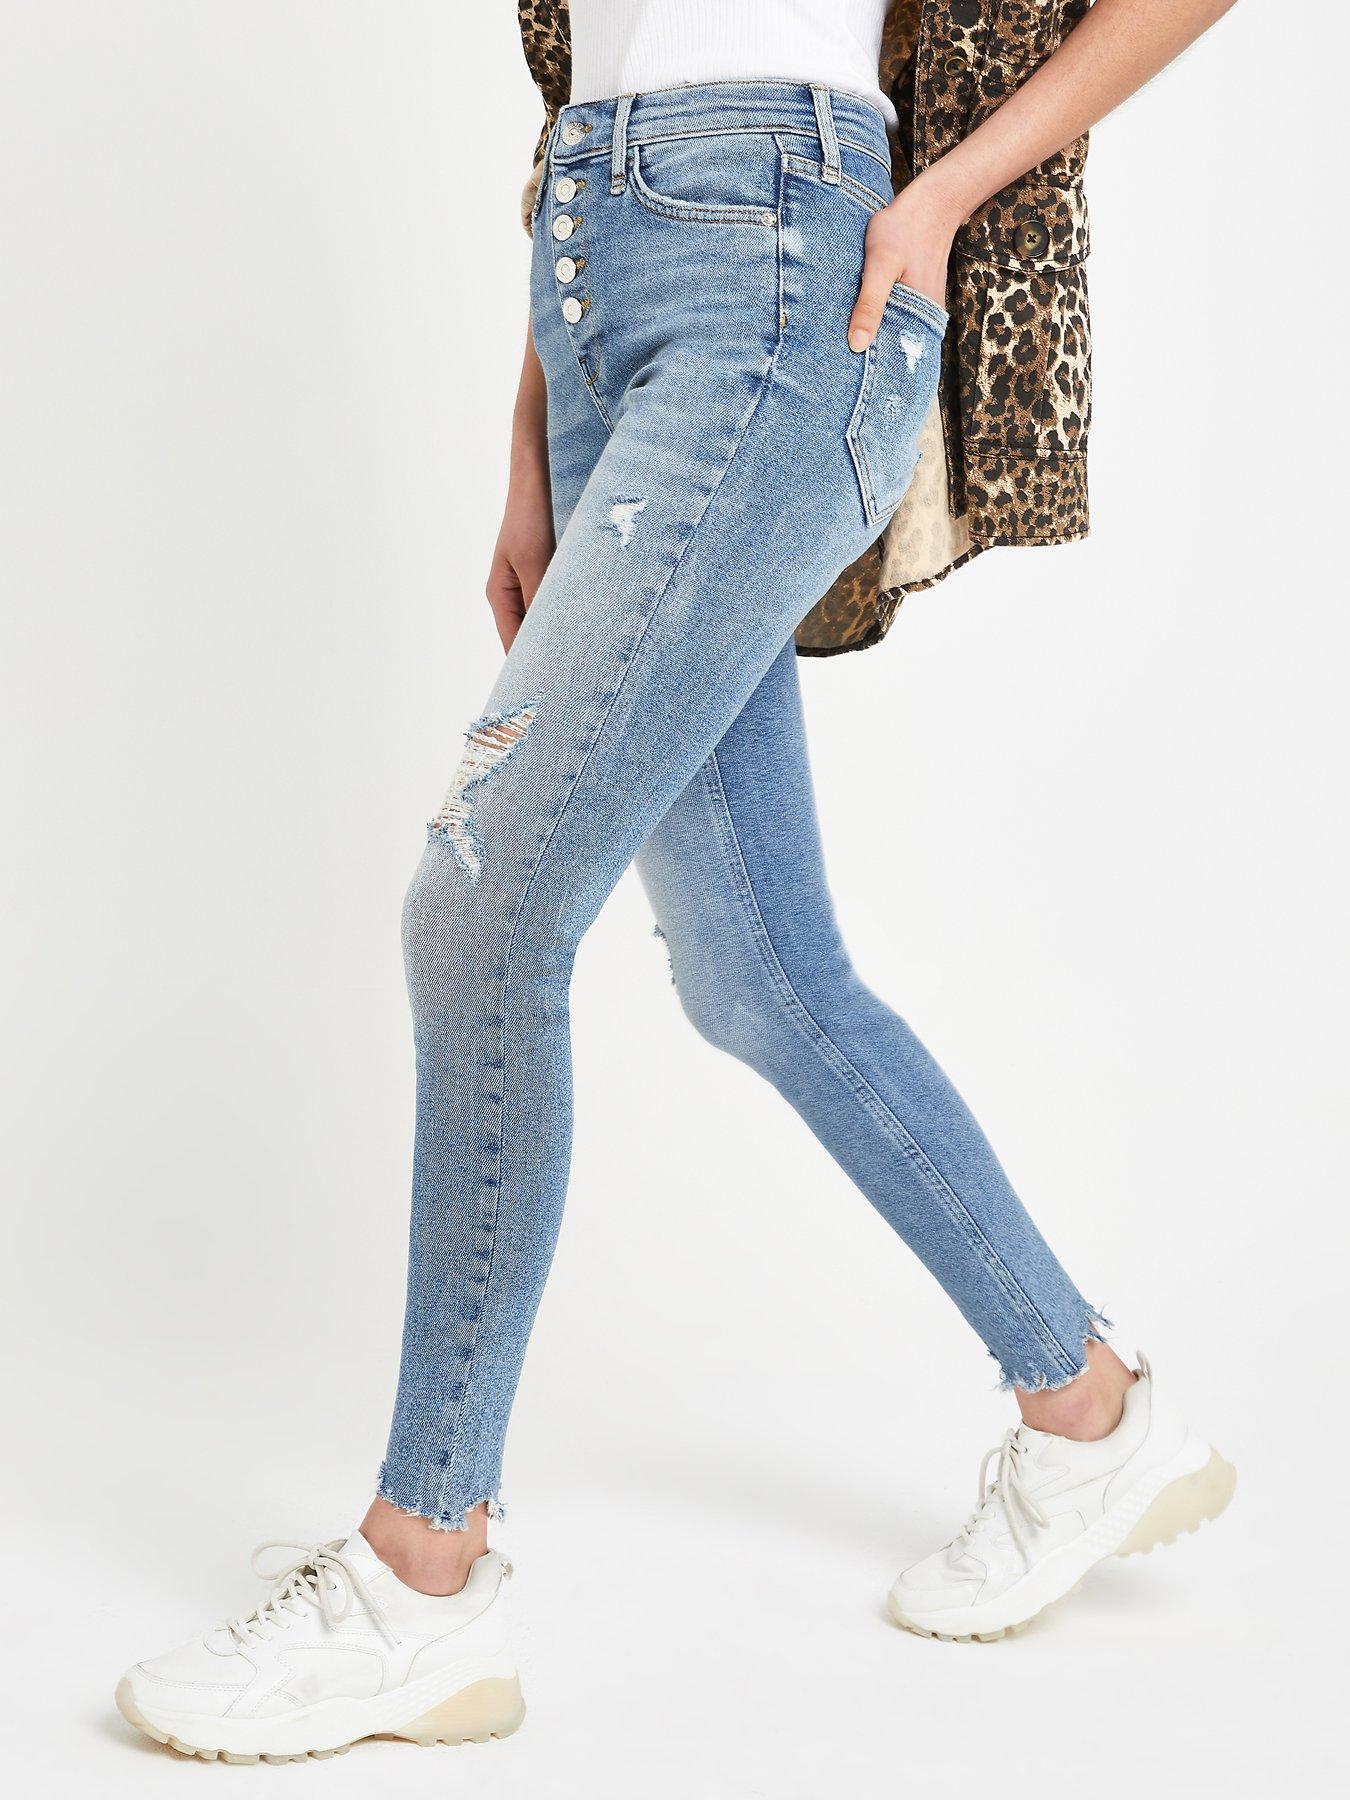 river island ripped jeans